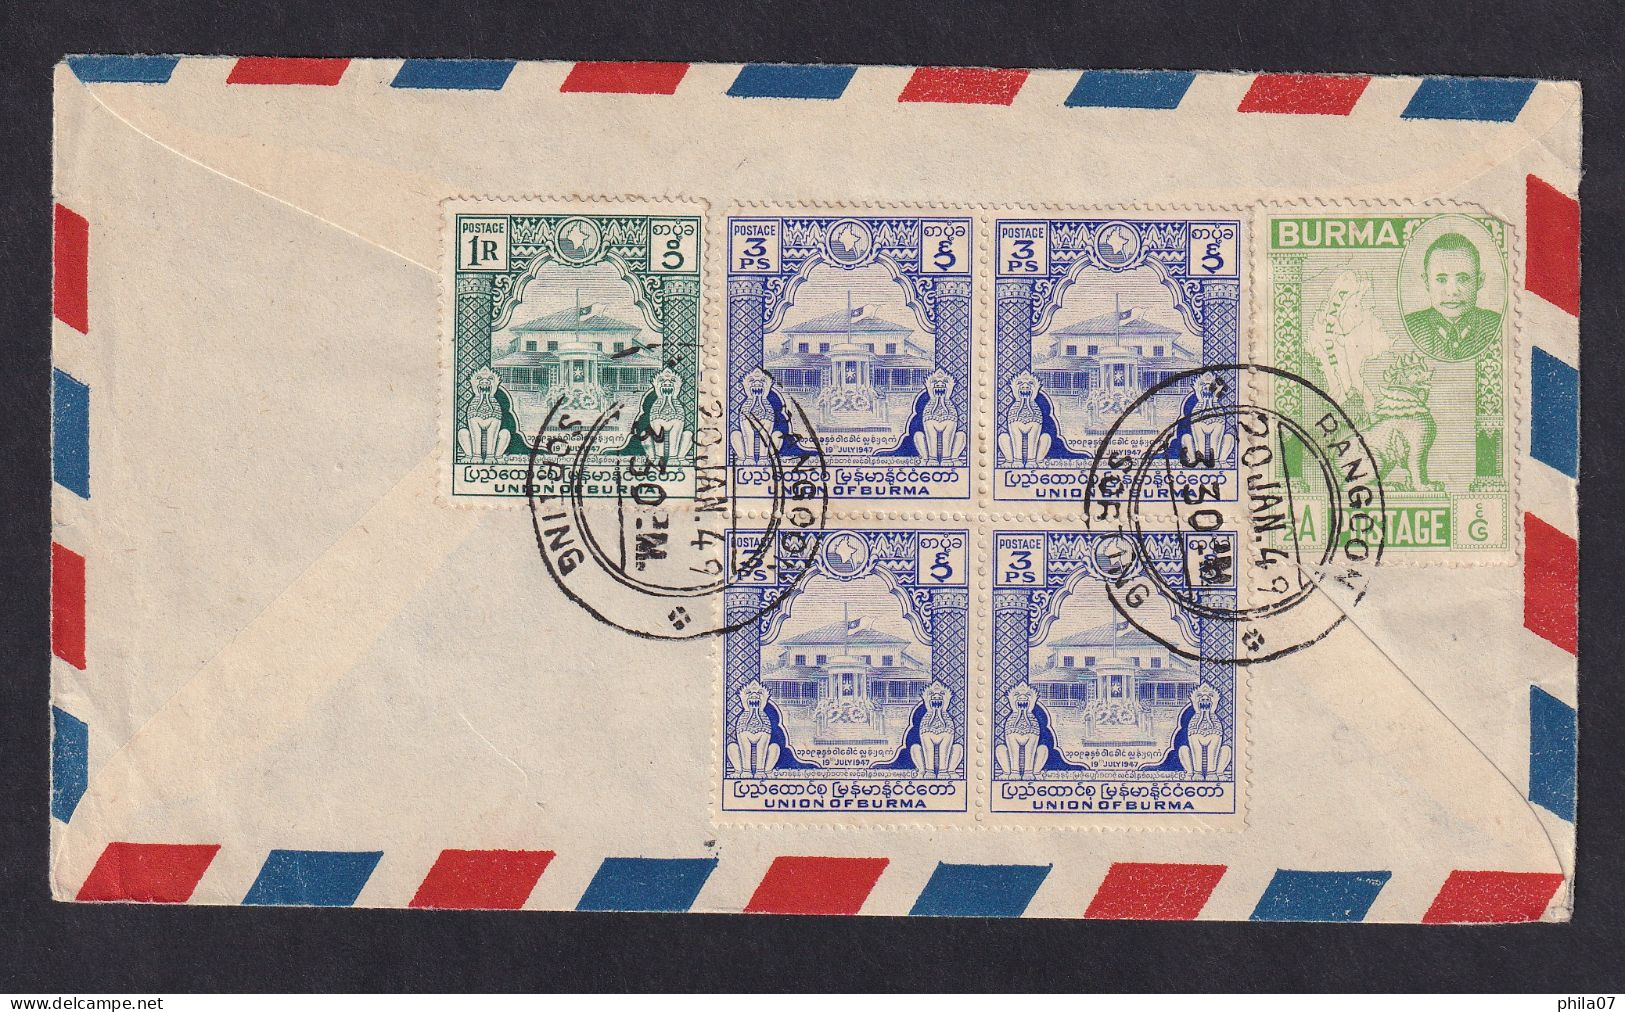 BURMA - Envelope Sent Via Air Mail From Rangoon To USA 1949, Nice Mass Franking On The Back / 2 Scans - Asia (Other)